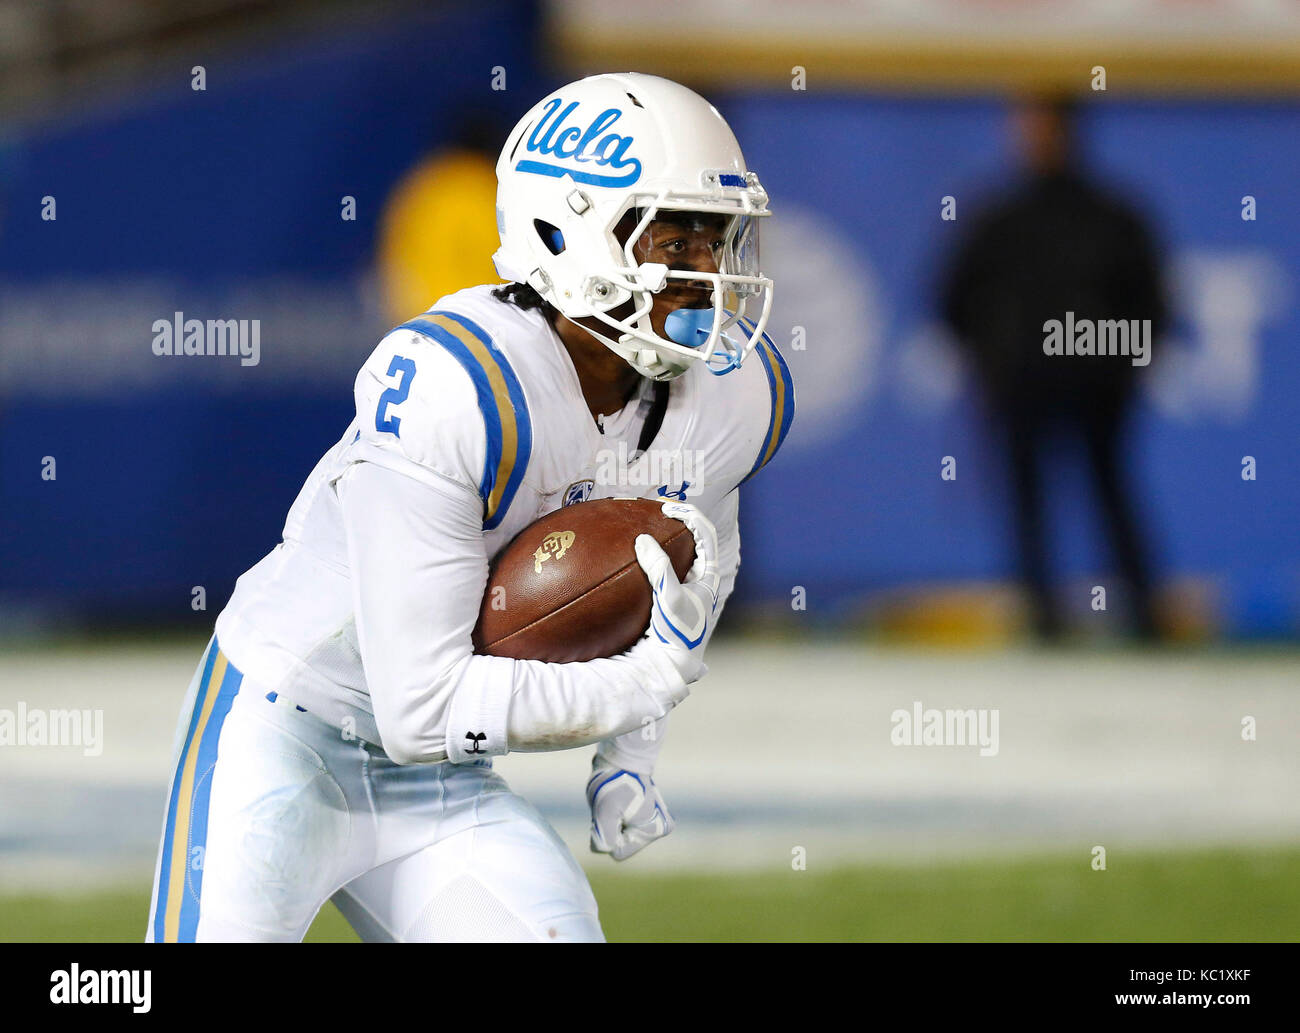 September 30, 2017 UCLA Bruins wide receiver Jordan Lasley #2 in action  during the NCAA football game between the UCLA Bruins and the Colorado  Buffaloes at the Rose Bowl in Pasadena, California.